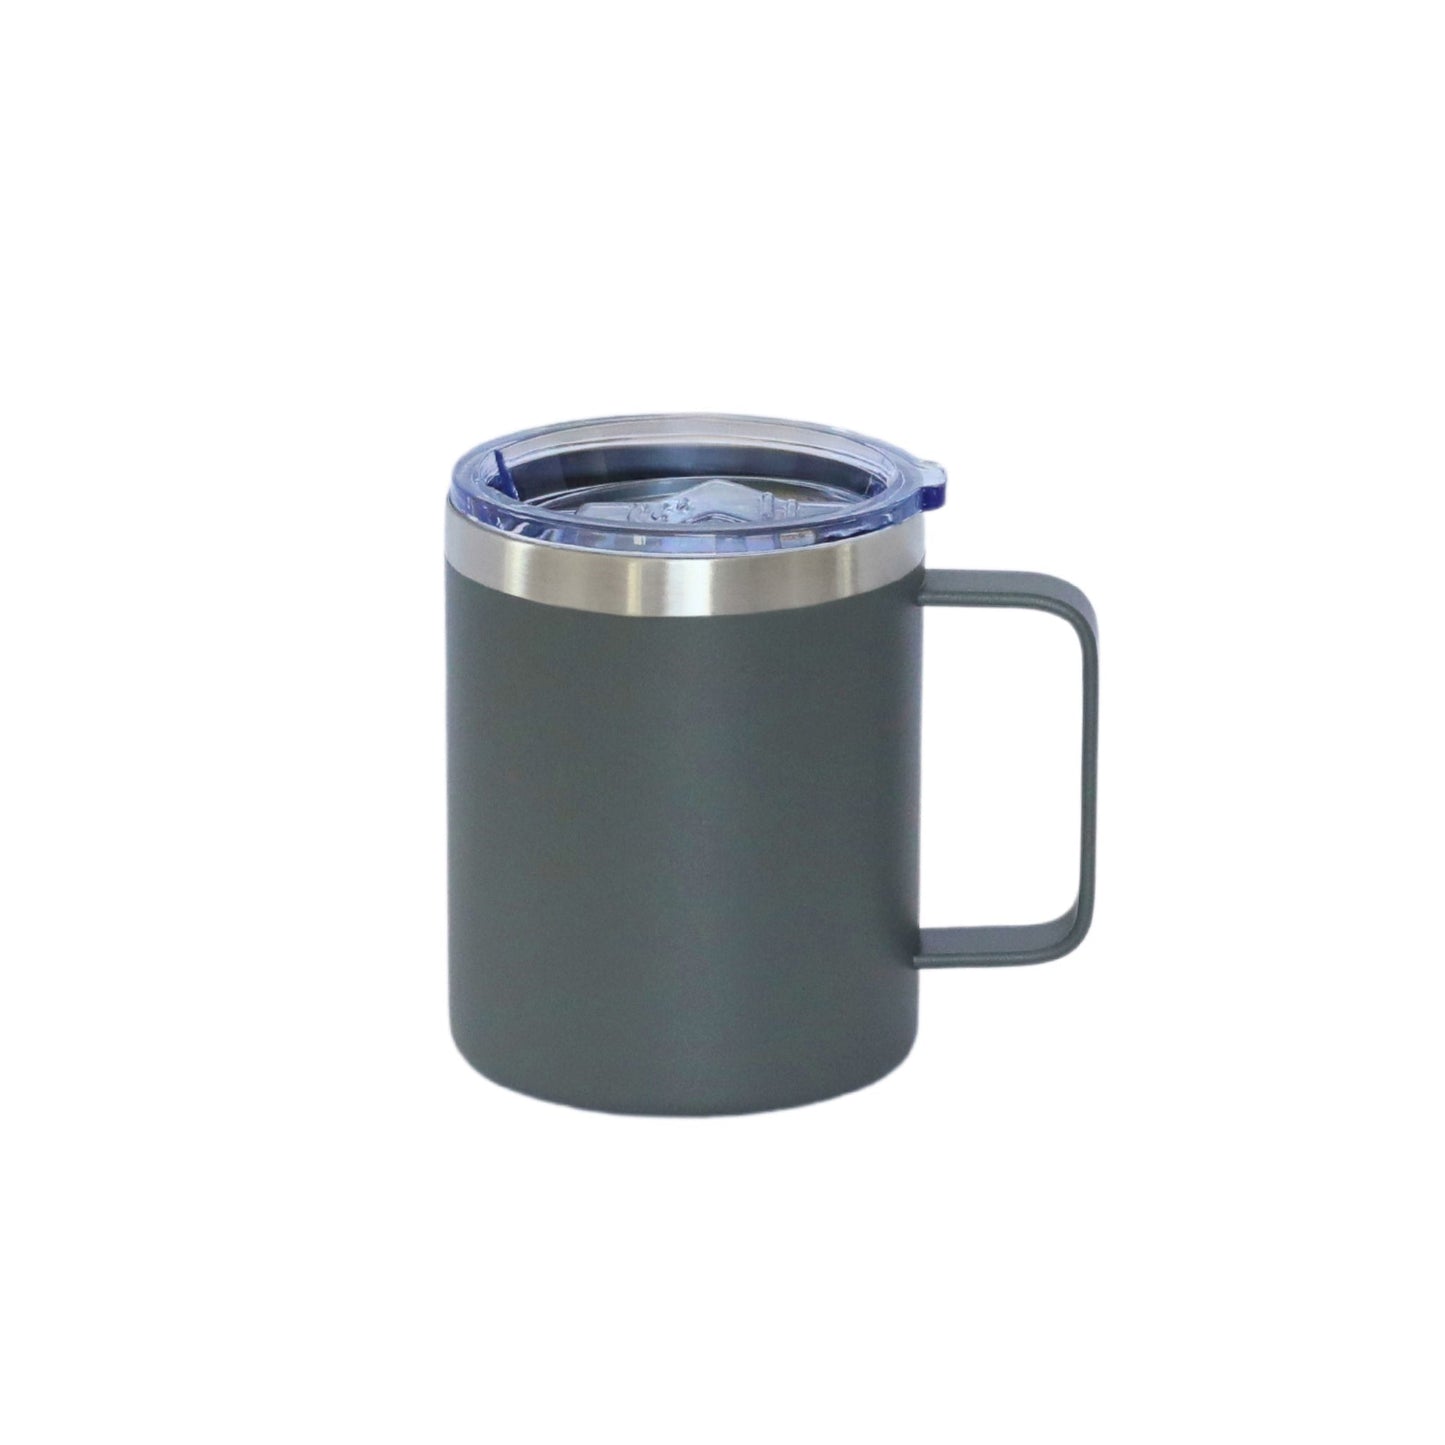 12 Oz Stainless Steel Travel Mug with Handle - Grey by Creative Gifts